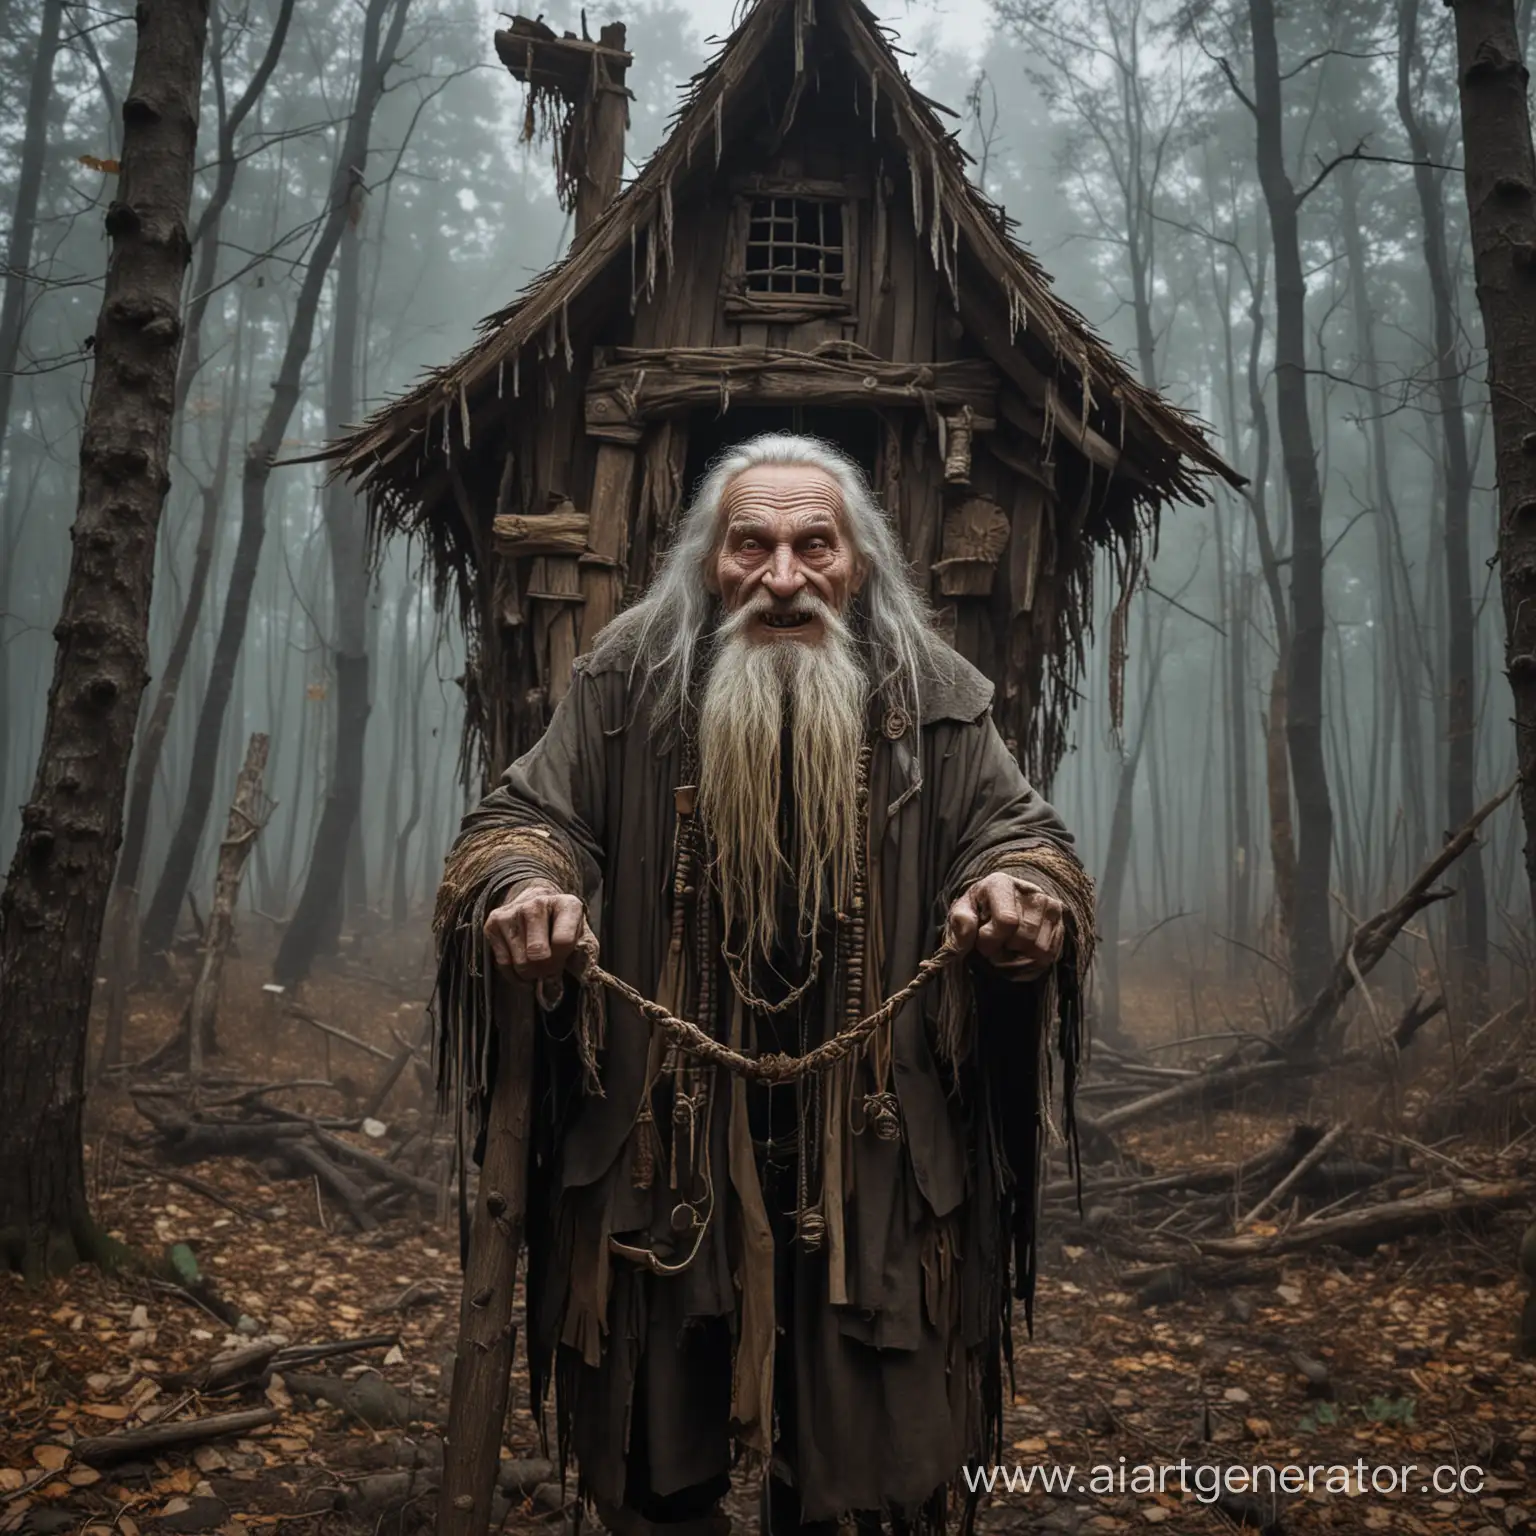 Mysterious-Encounter-with-Baba-Yaga-in-Her-Enchanted-Forest